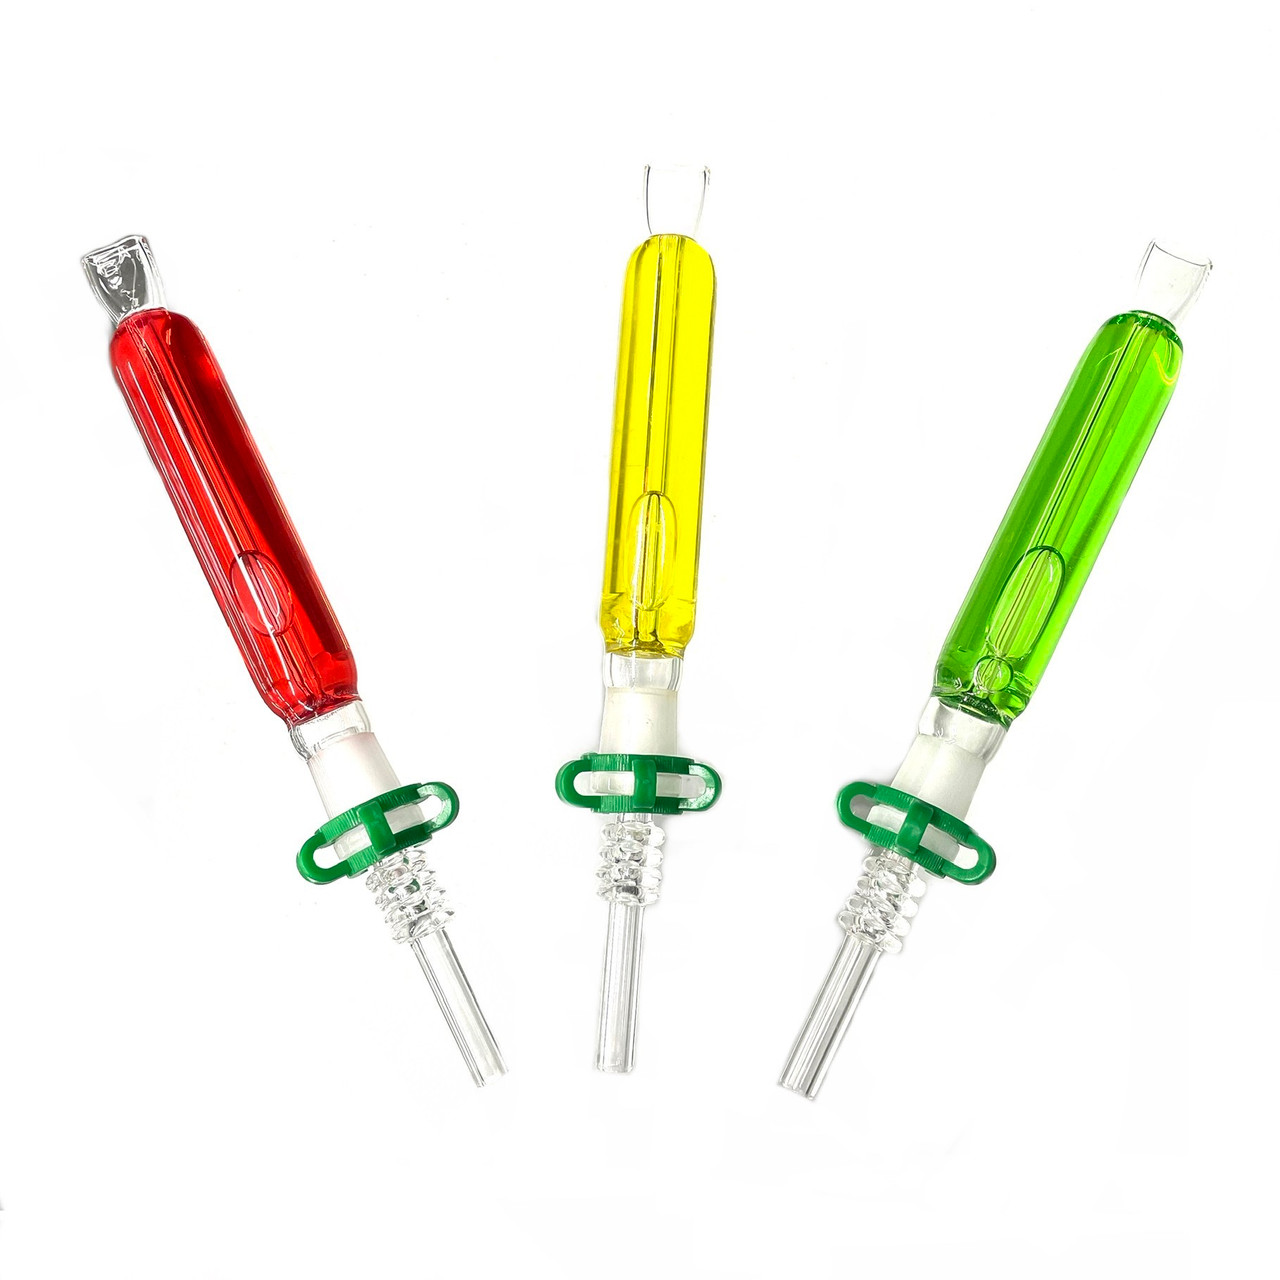 Glycerin Nectar Collector - Freezable Dab Straw